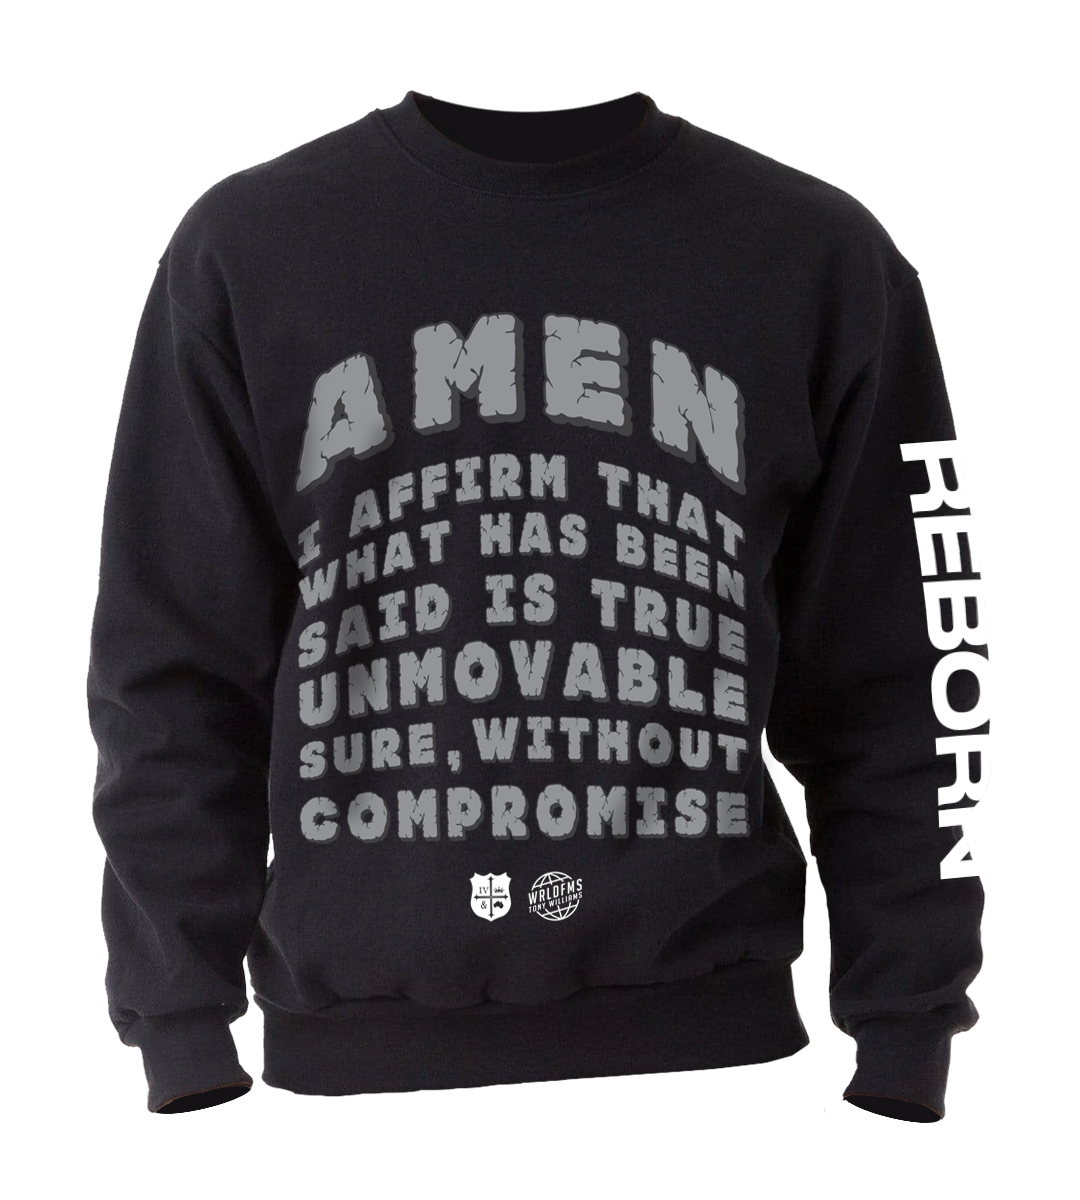 Amen I affirm that what has been said is true unmovable sure without compromise reborn Petra black crewneck sweatshirt WRLDFMS